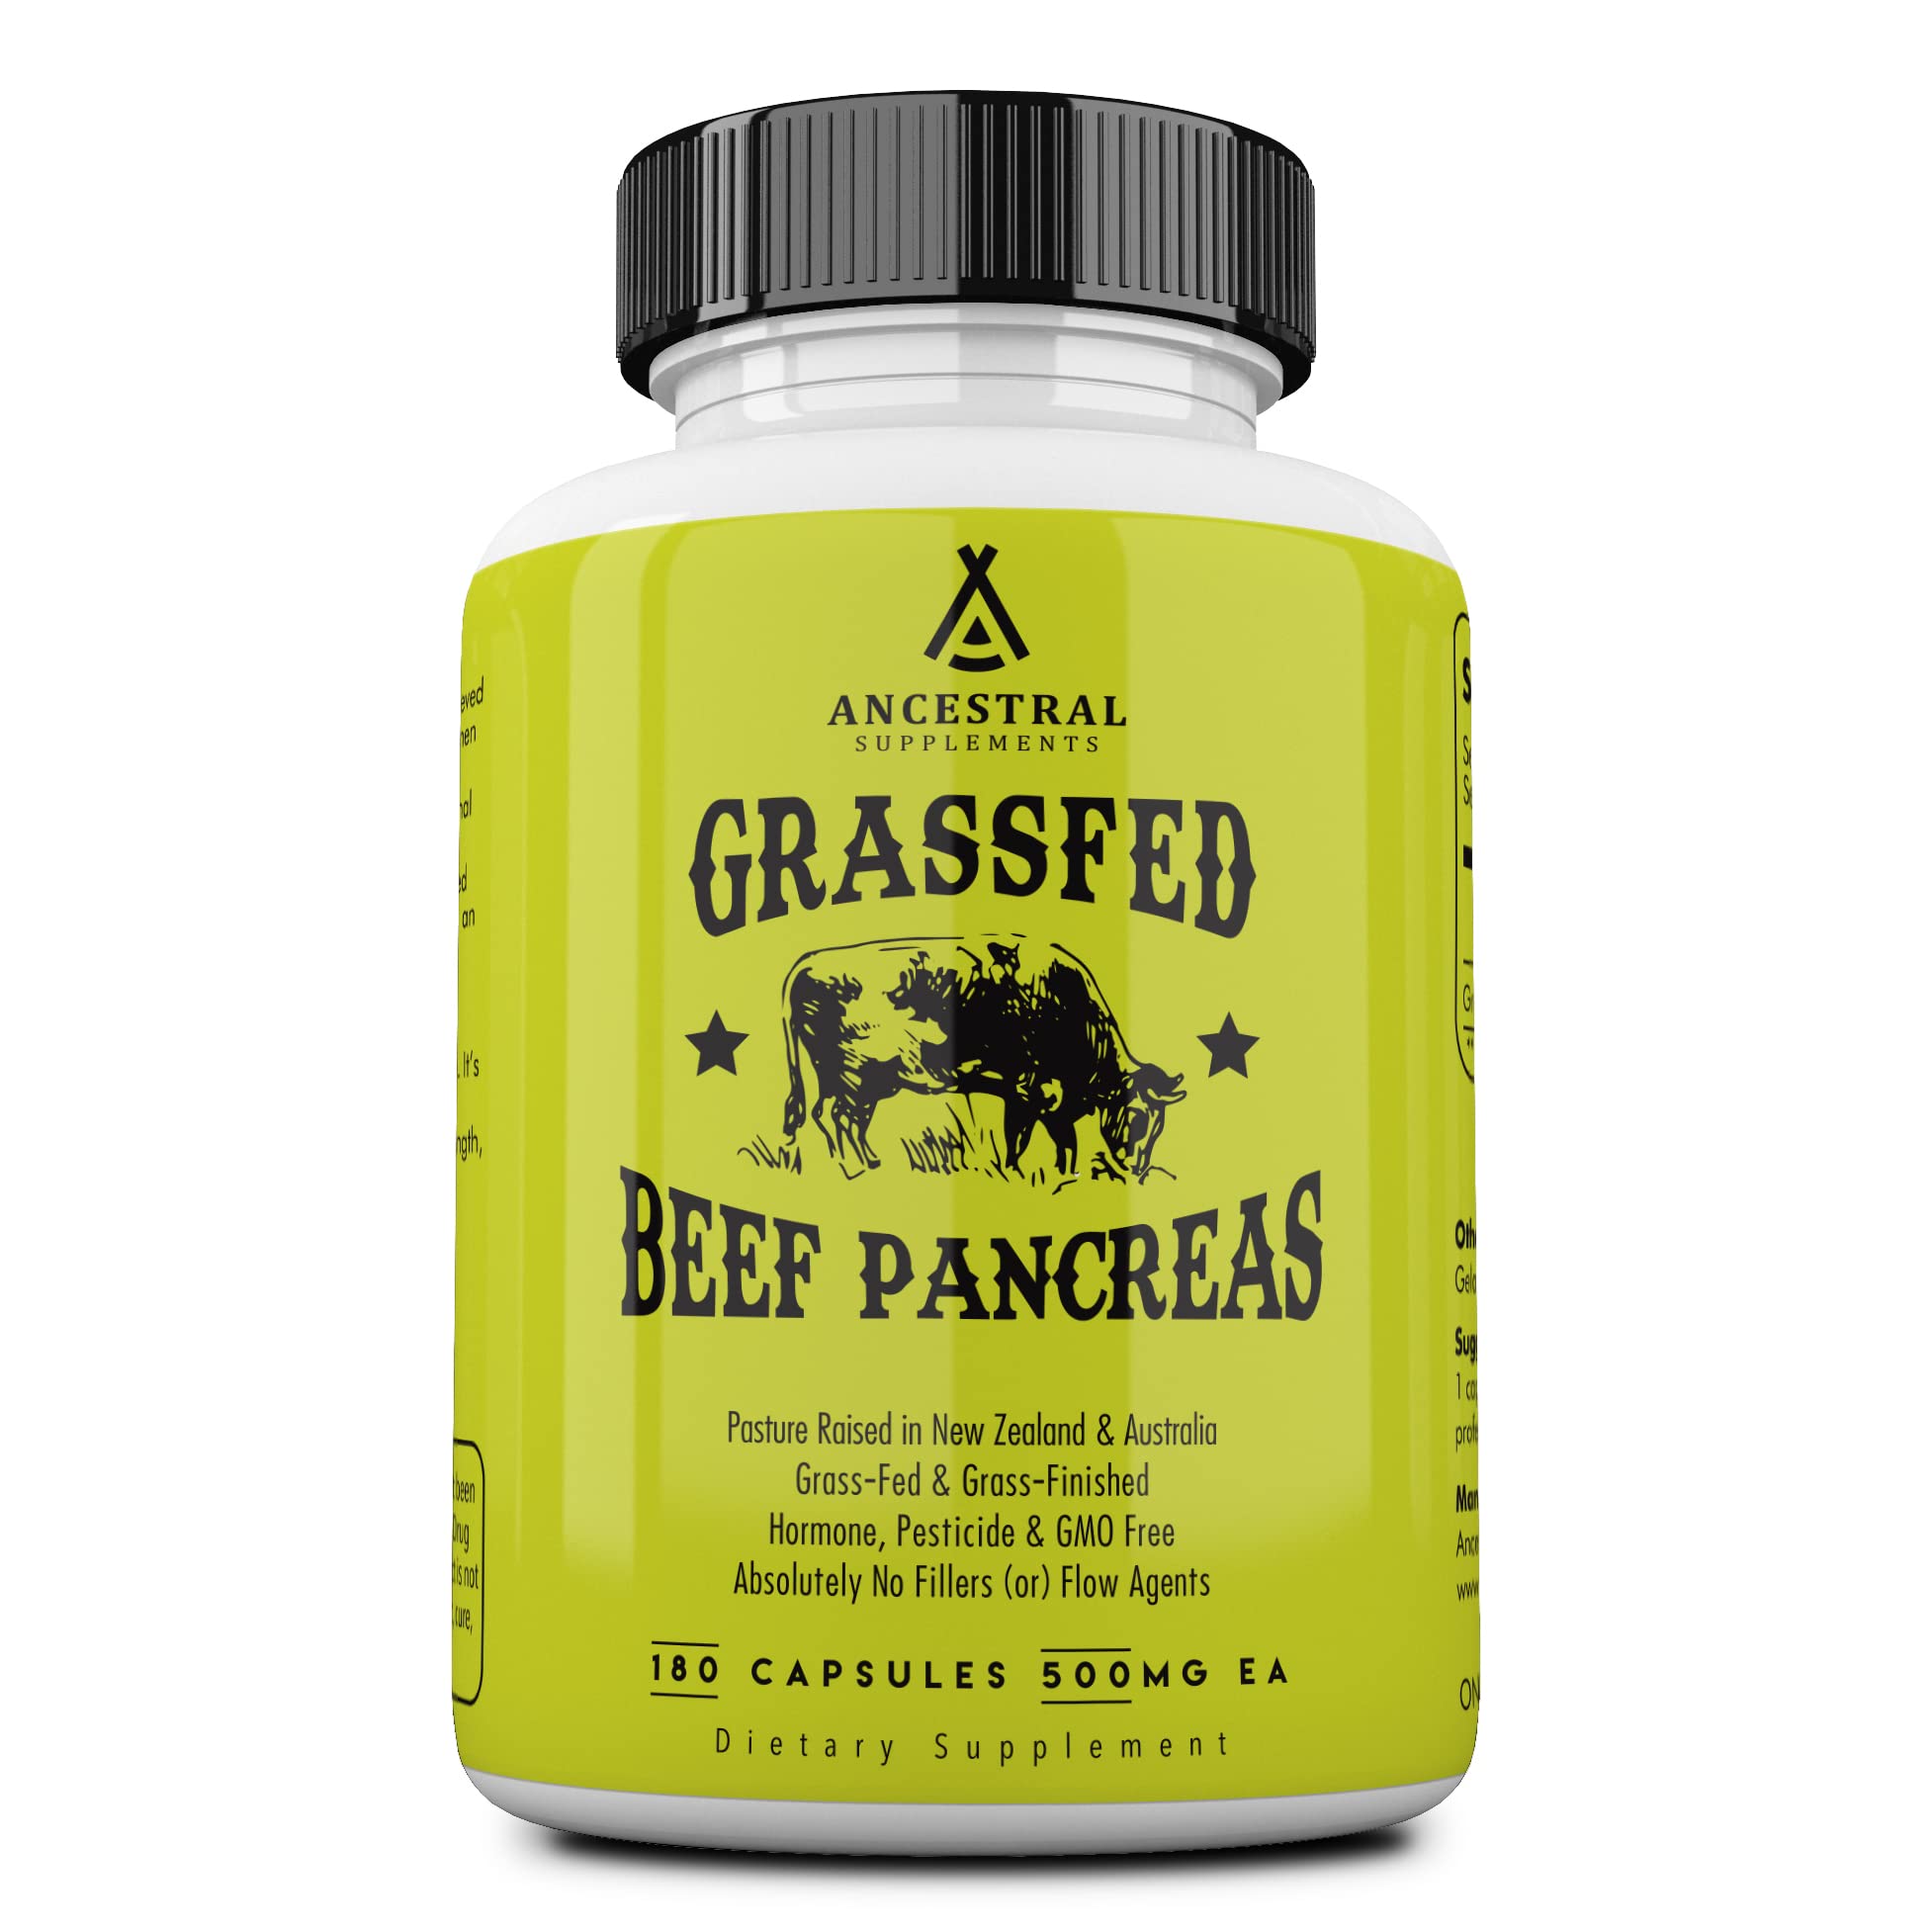 Ancestral Supplements Grass Fed Beef Pancreas Supplement, 500mg, Pancreatic Support with Proteolytic Digestive Enzymes for Digestion Support, Including Trypsin, Non GMO, 180 Capsules